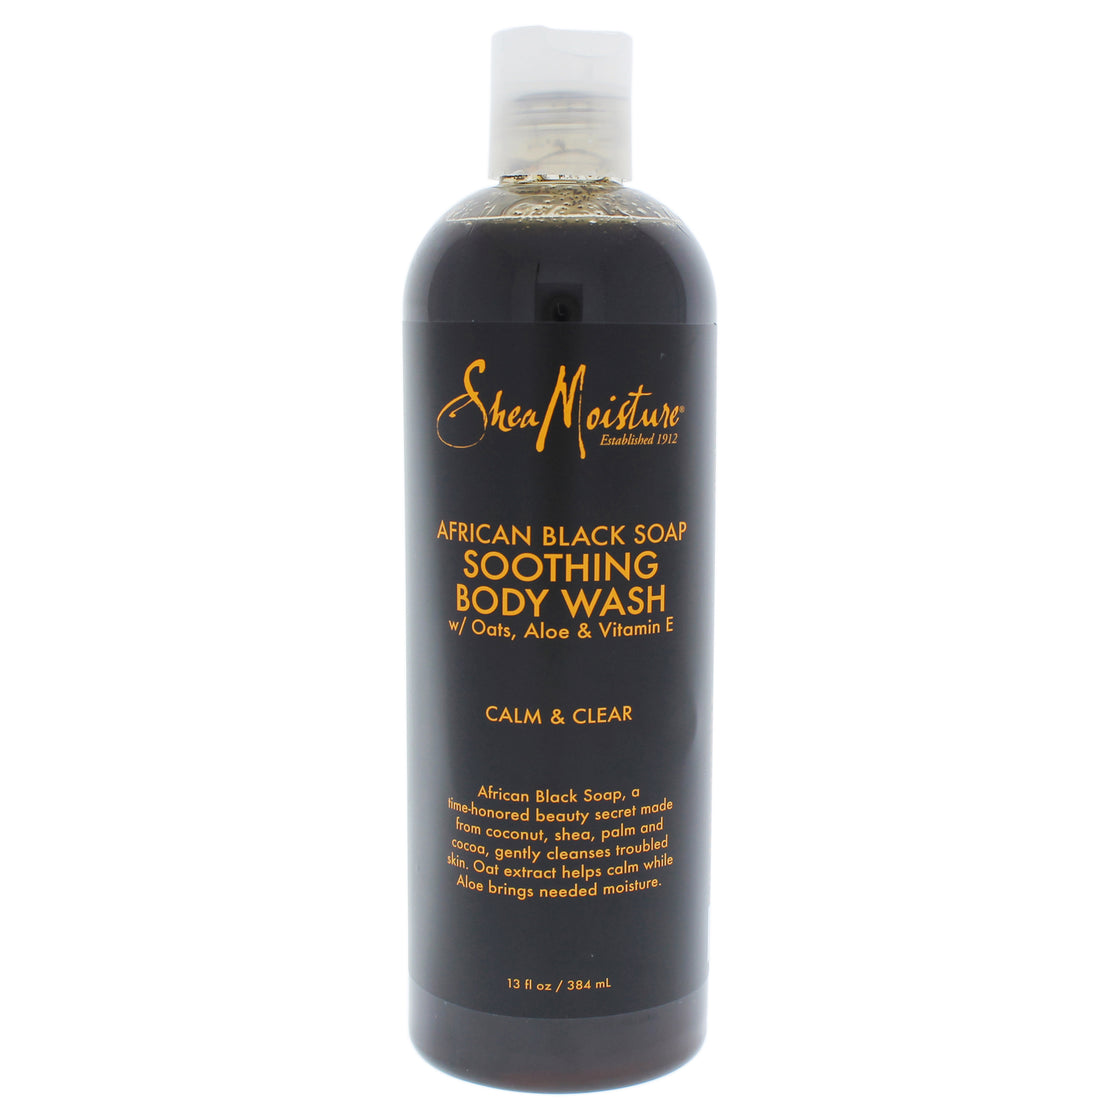 African Black Soap Soothing Body Wash by Shea Moisture for Unisex - 13 oz Body Wash